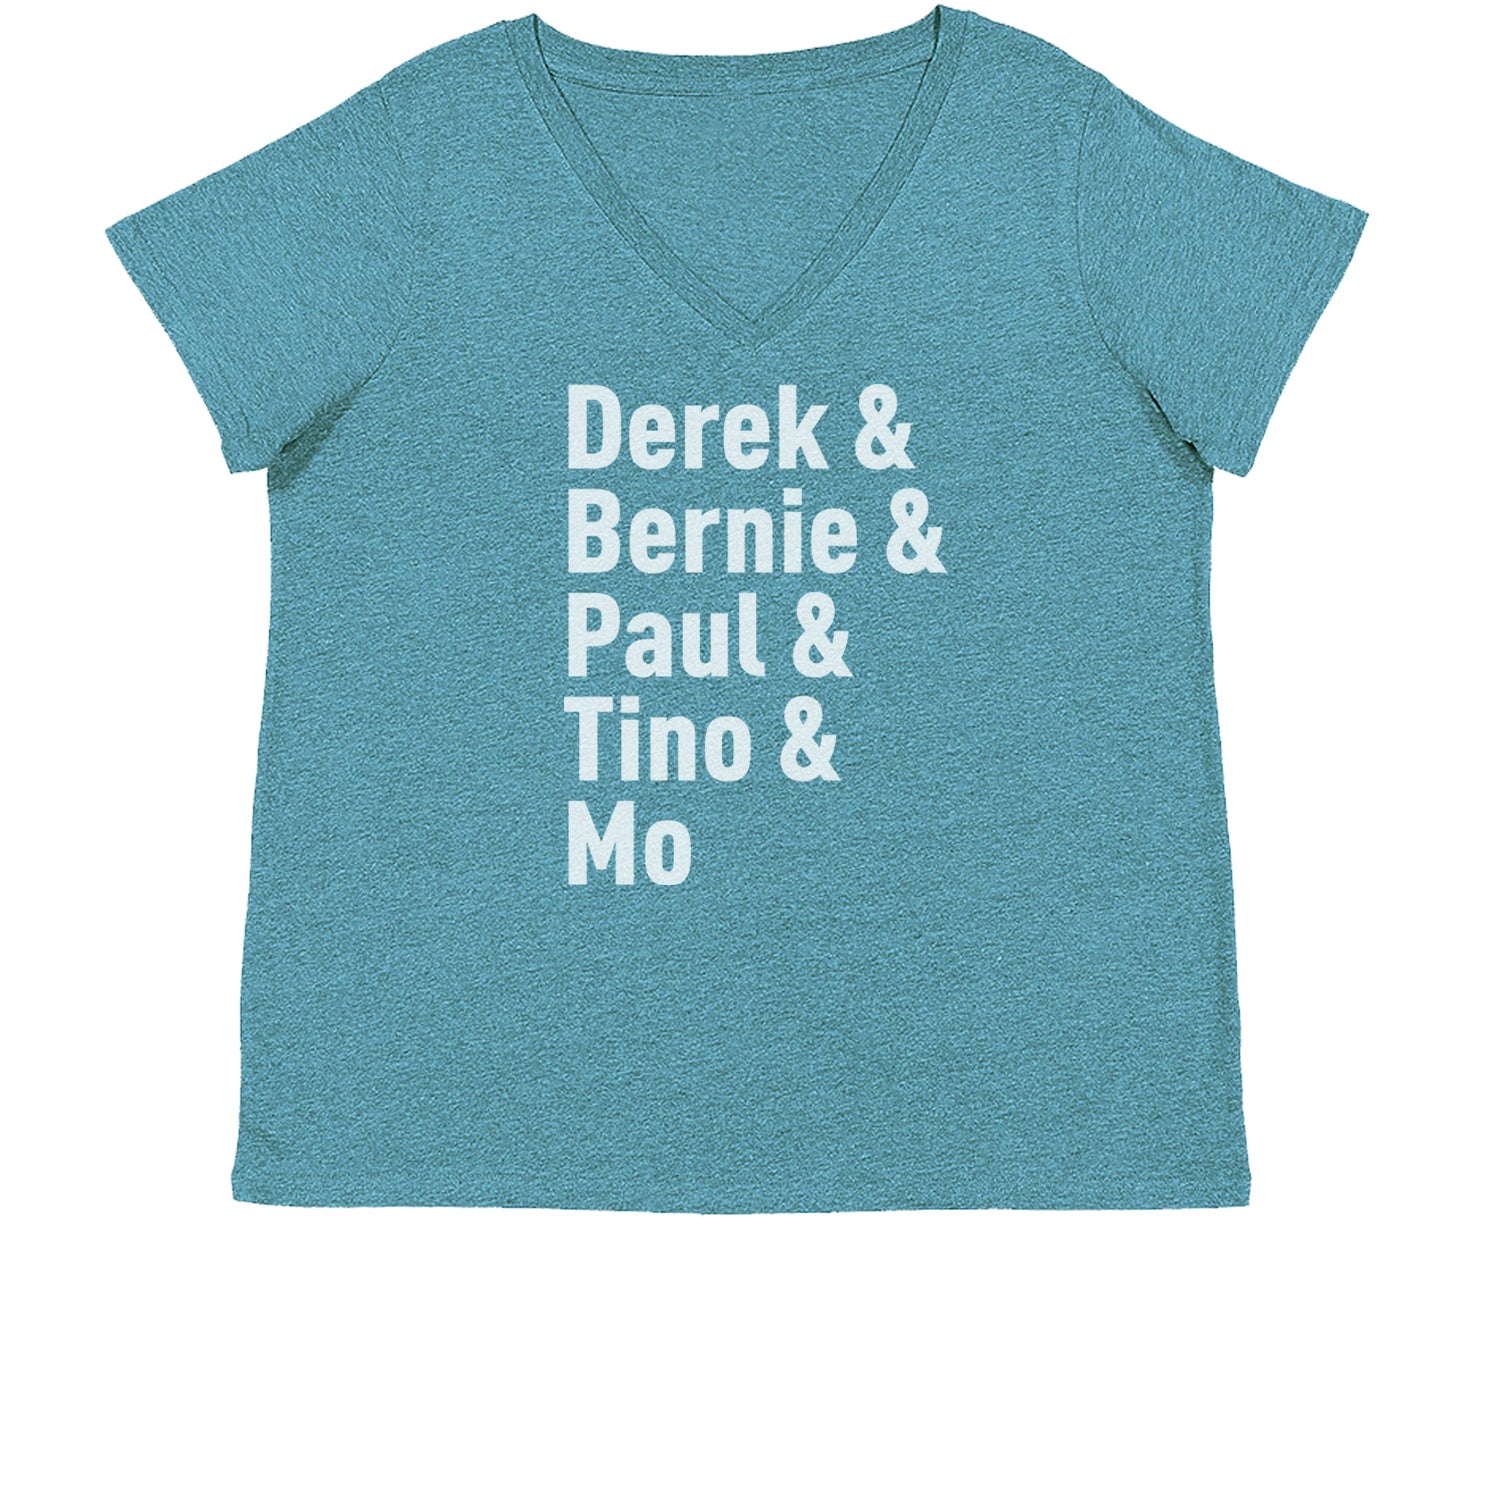 Derek and Bernie and Paul and Tino and Mo Womens Plus Size V-Neck T-shirt baseball, comes, here, judge, the by Expression Tees